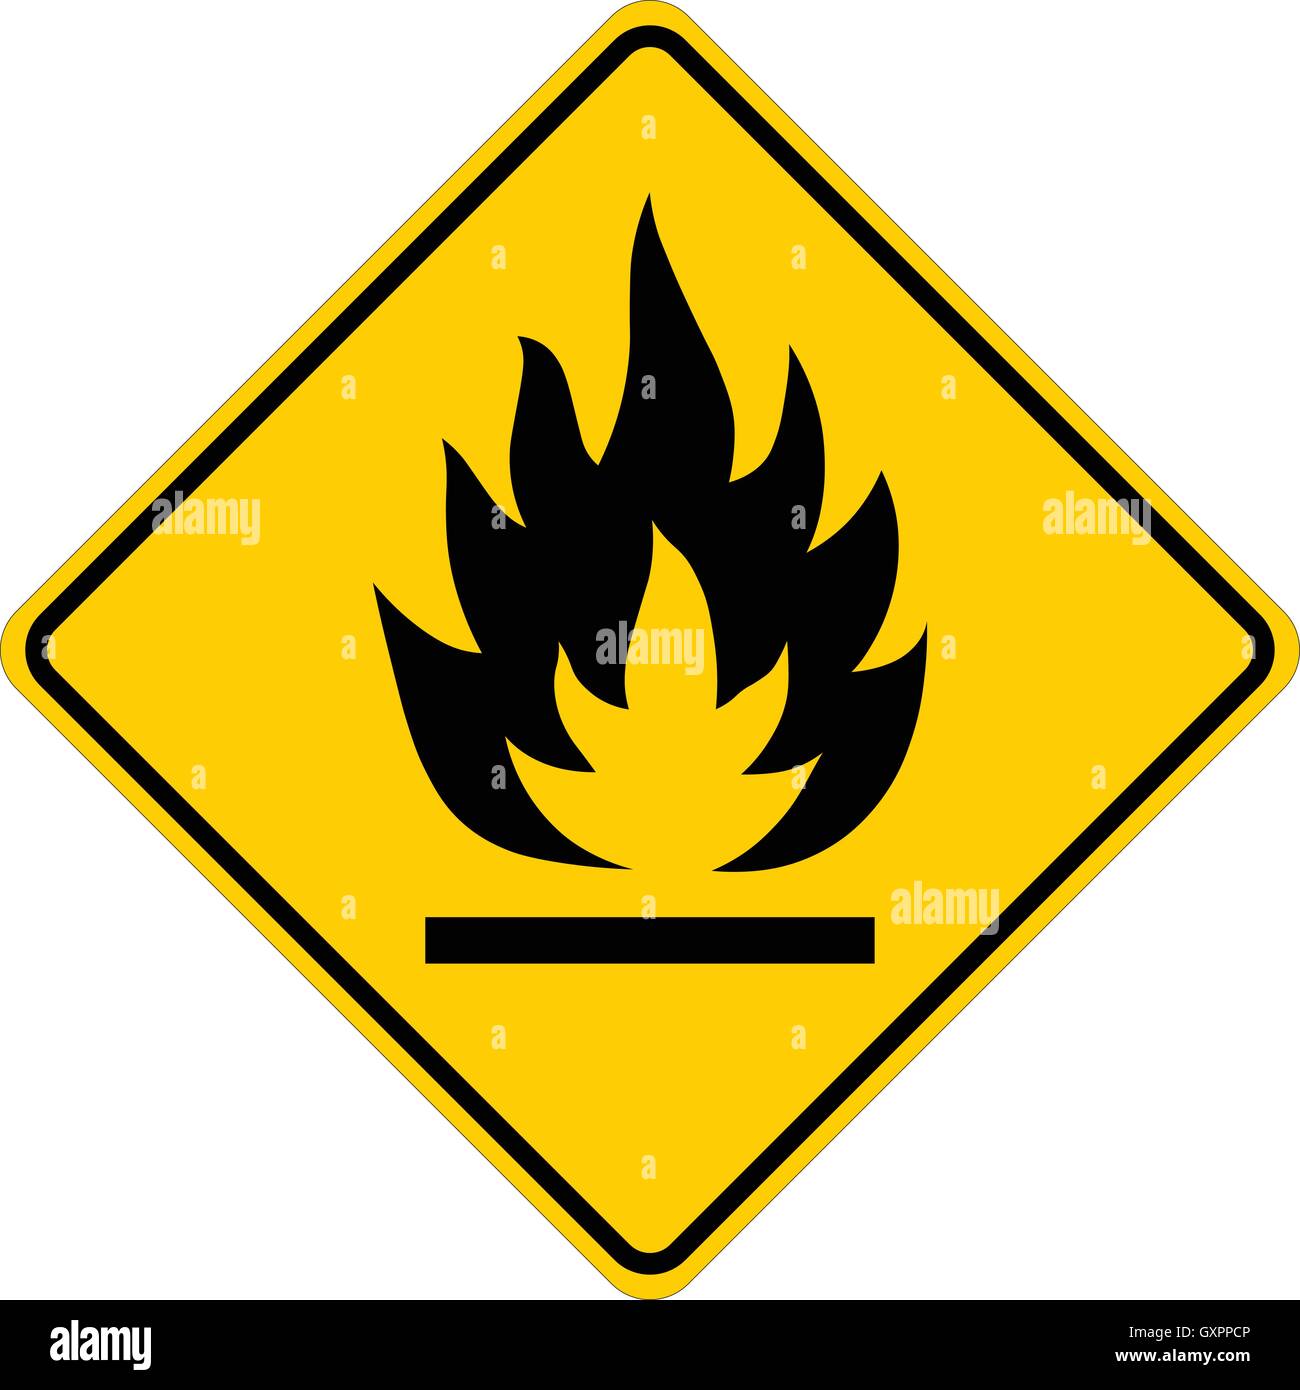 Flammable yellow square warning sign, isolated vector illustration. Stock Vector